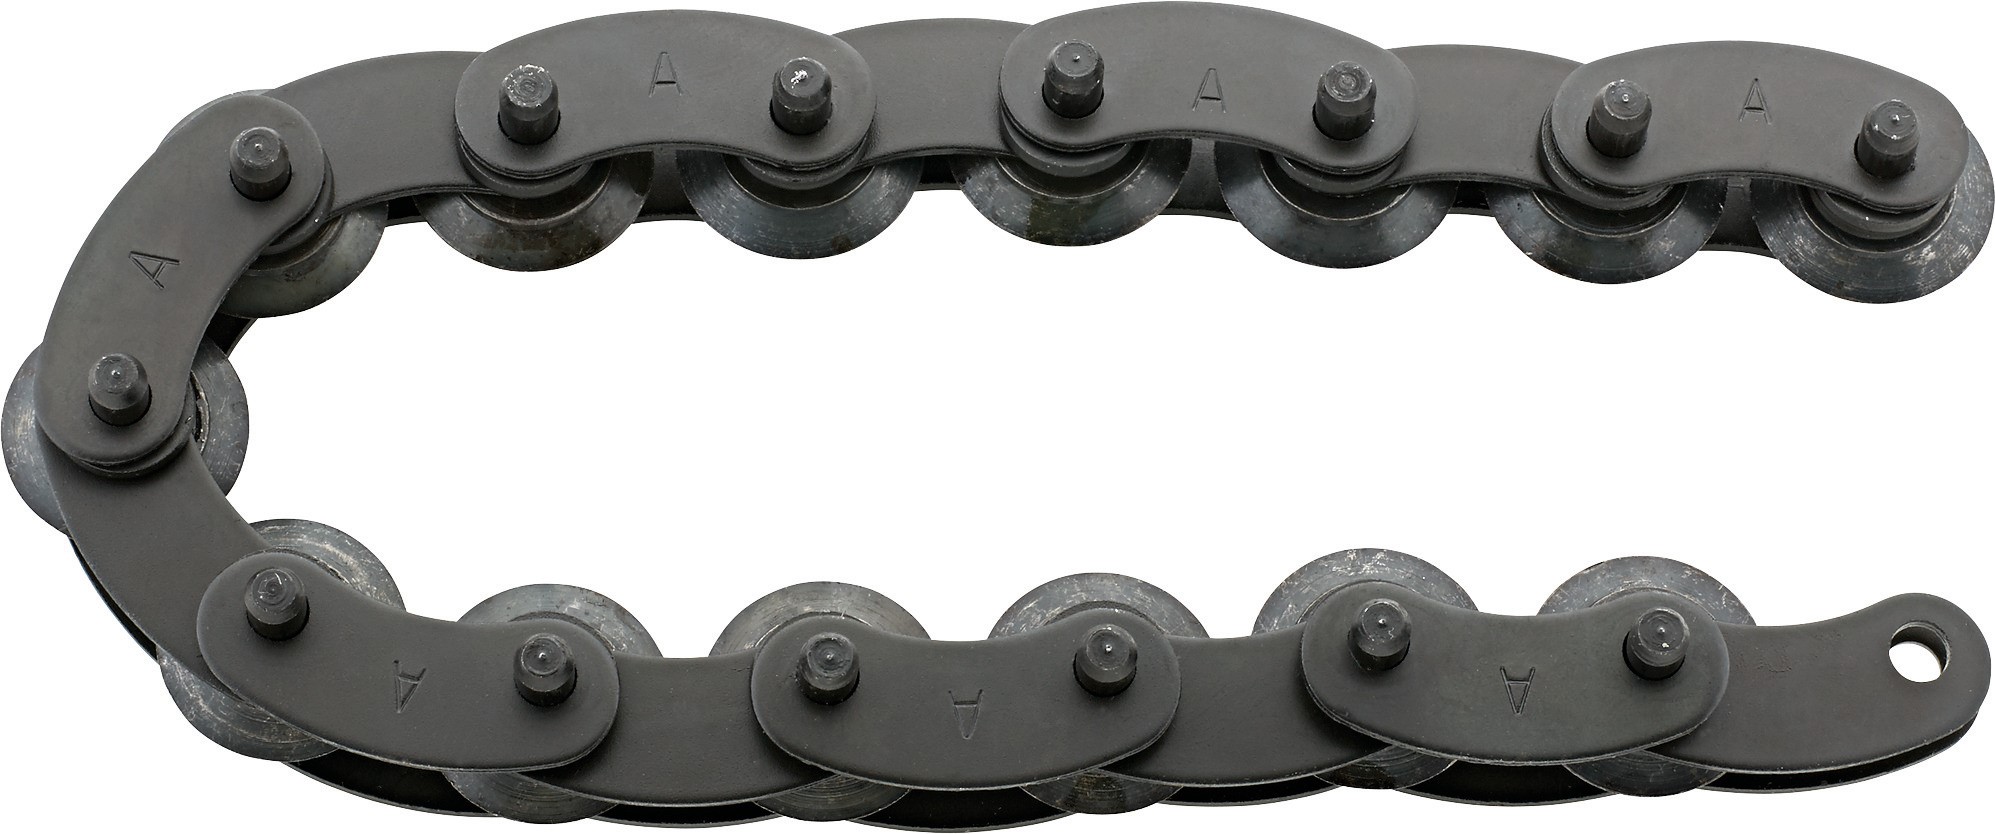 Replacement Chain For Pipe Cutter